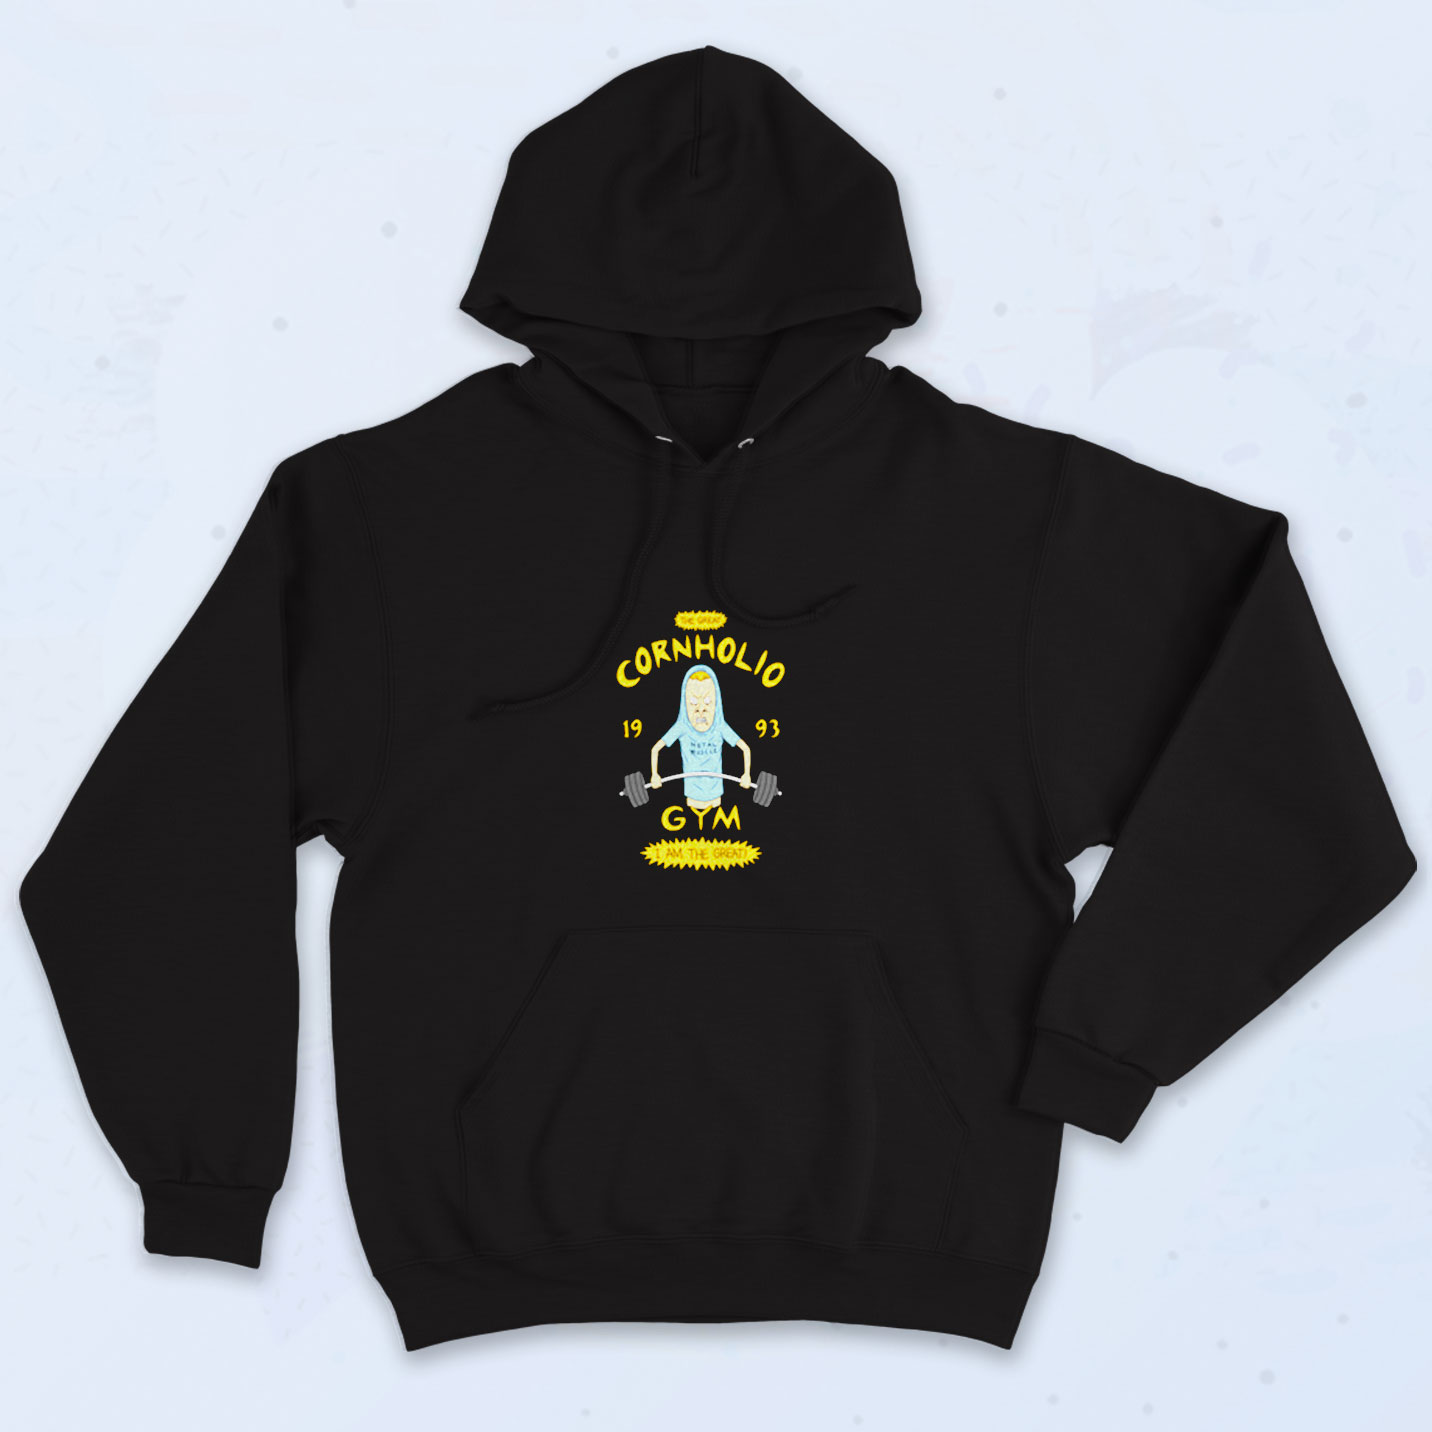 The Great Cornholio Gym 1993 Aesthetic Hoodie - 90sclothes.com